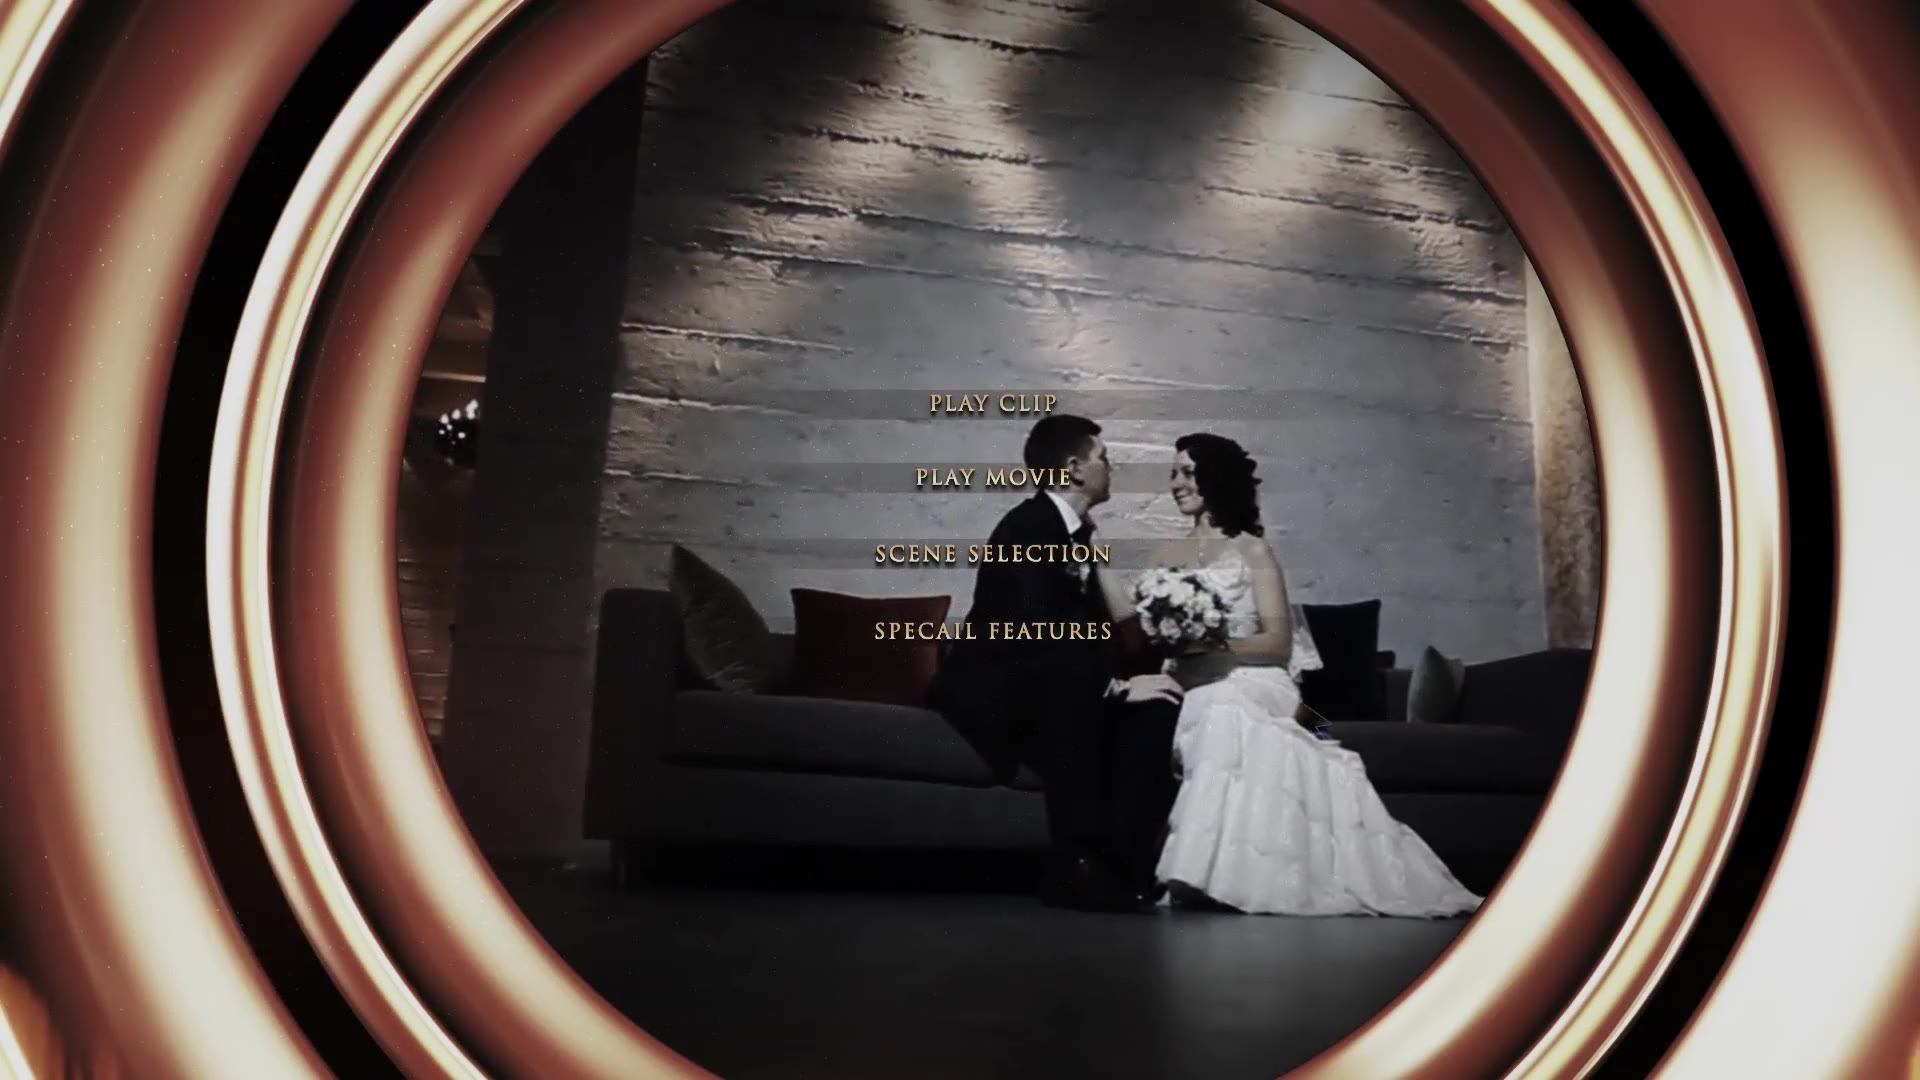 wedding dvd motion menu after effects free download